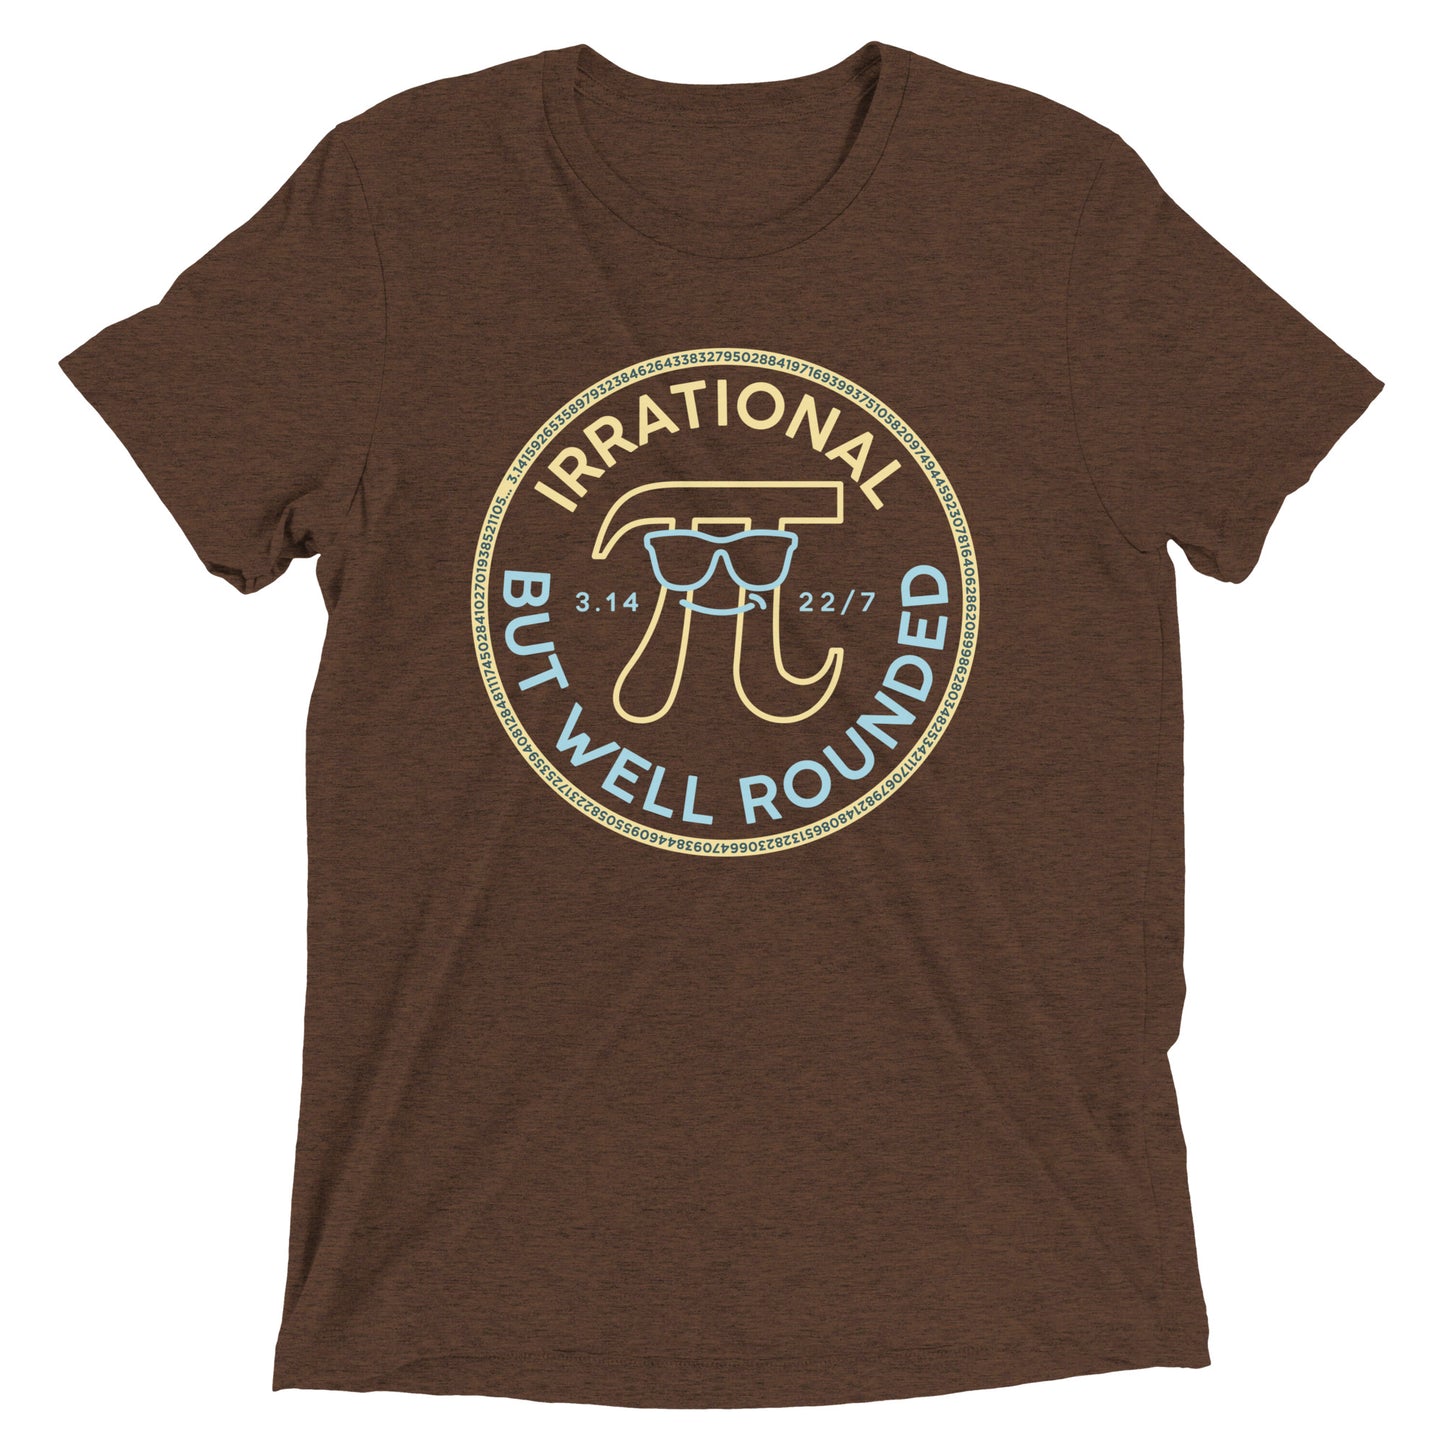 Irrational But Well Rounded Men's Tri-Blend Tee